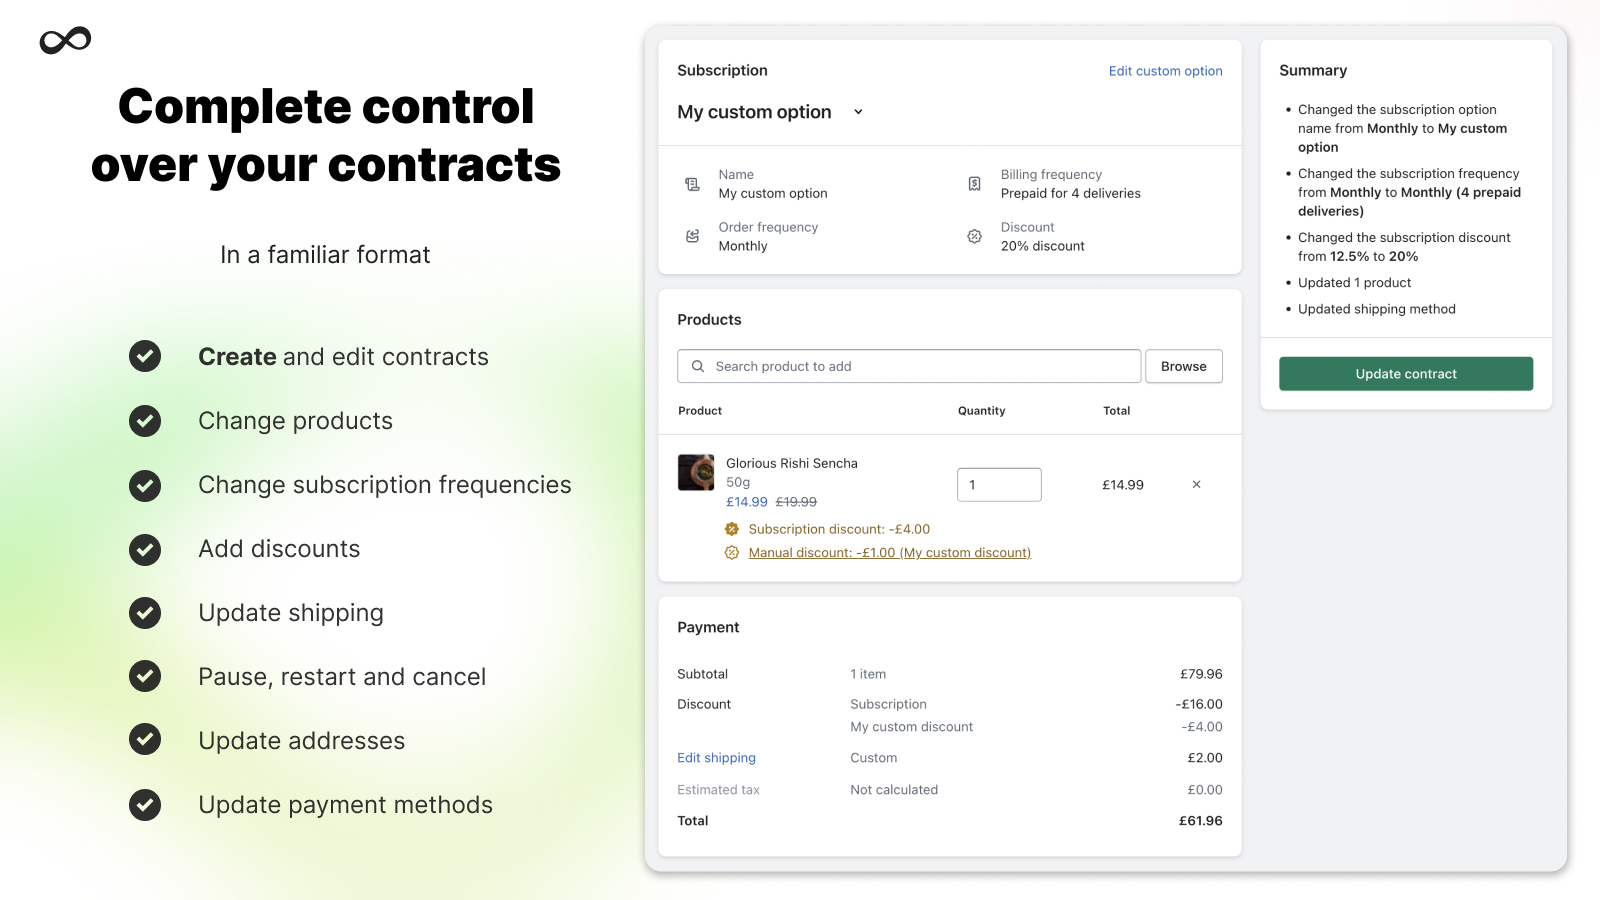 Complete control over your contracts